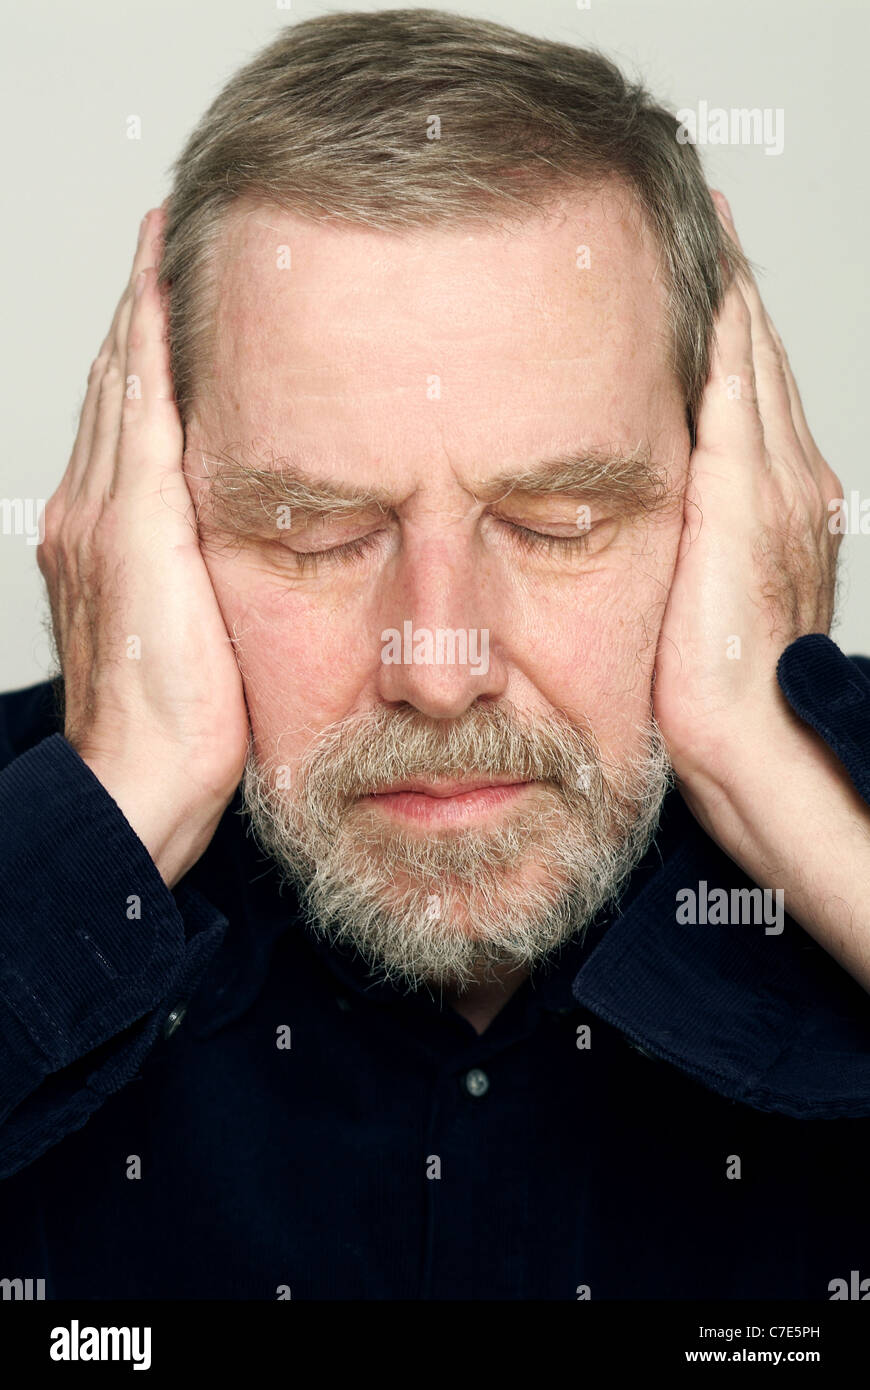 Man plugging his ears Stock Photo